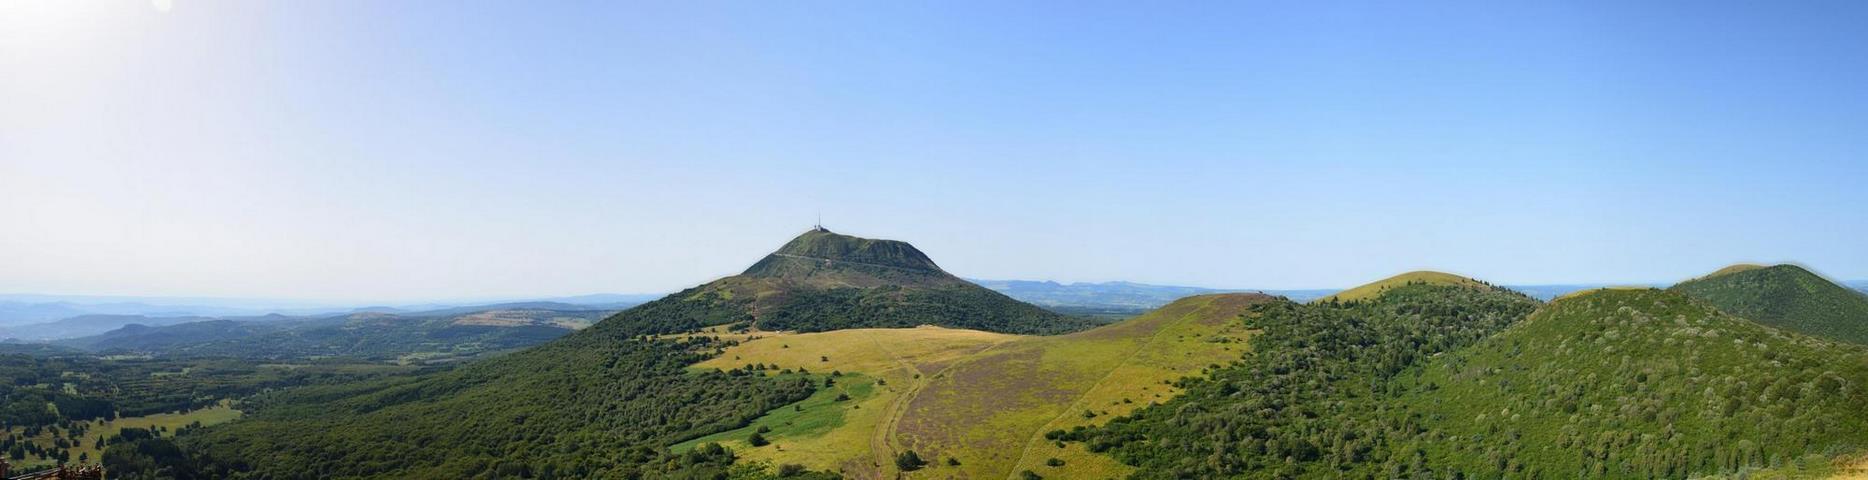 Panorama on the Puy de Dôme and the Chaine des Puys in Auvergne